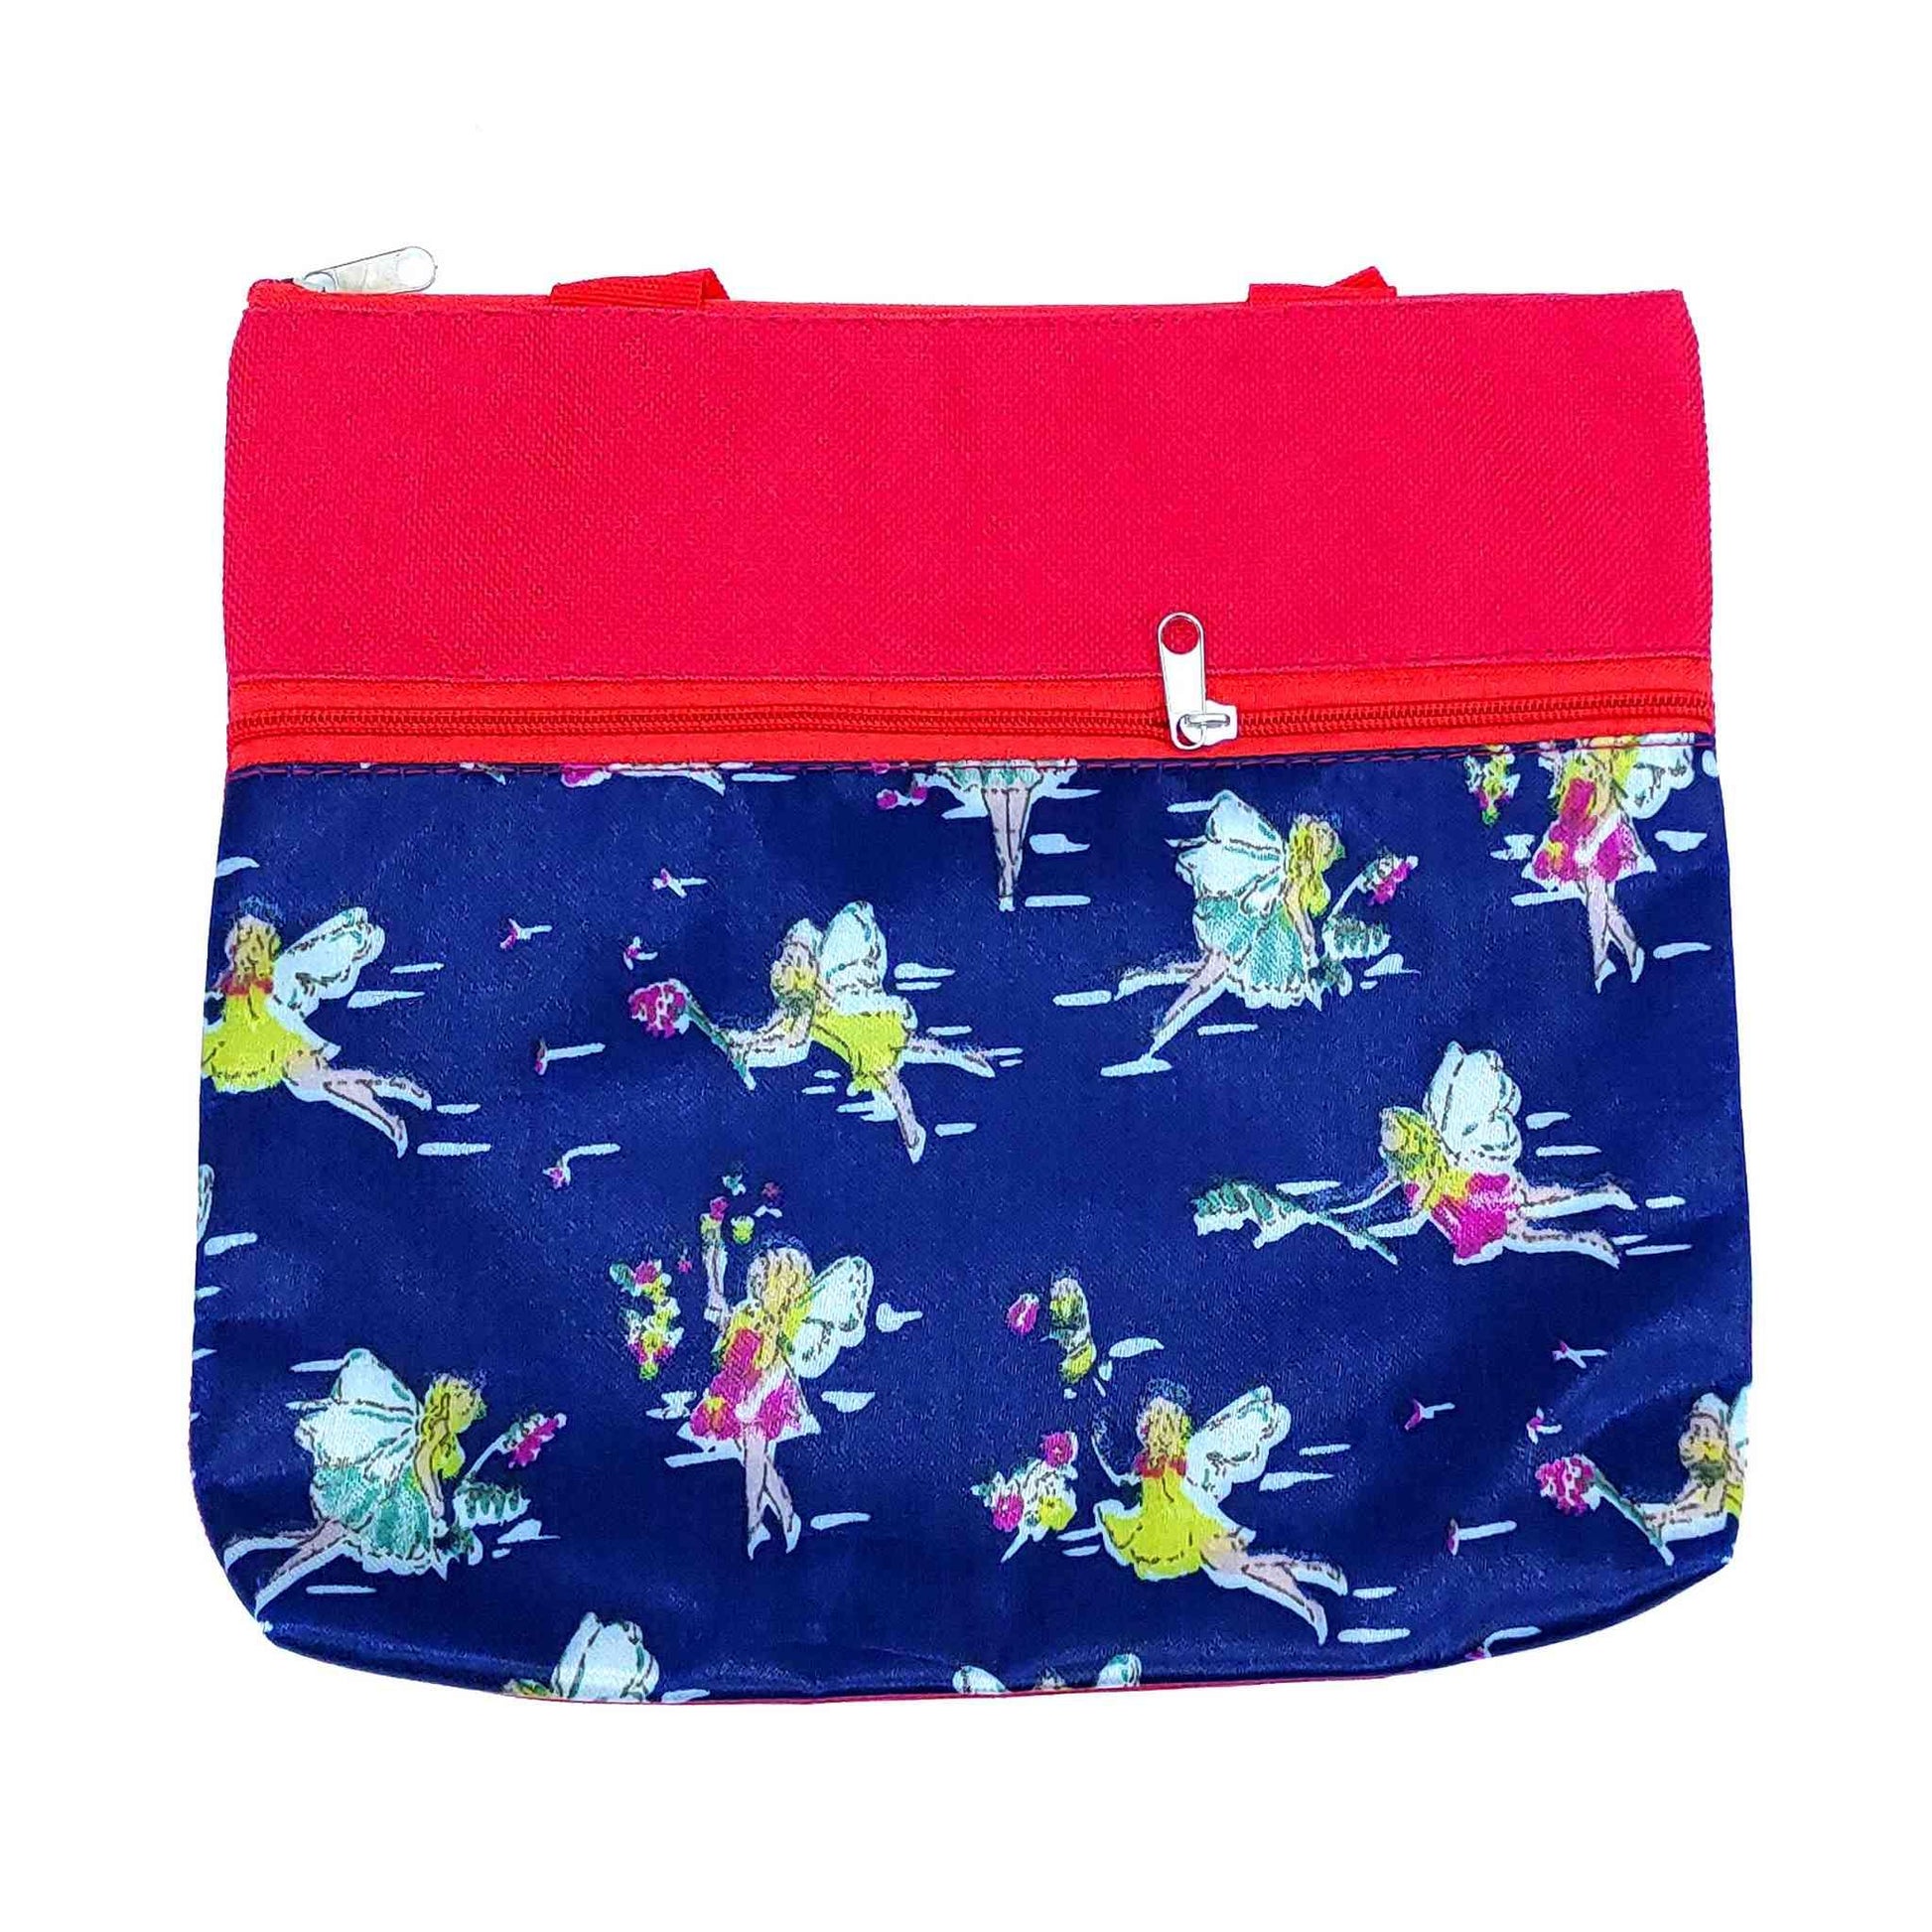 Indian Petals Imported Durable Canvas Printed multi purpose utility Medium size Bag with handles for all occasions for the girls and ladies, Design 1, Red - Indian Petals